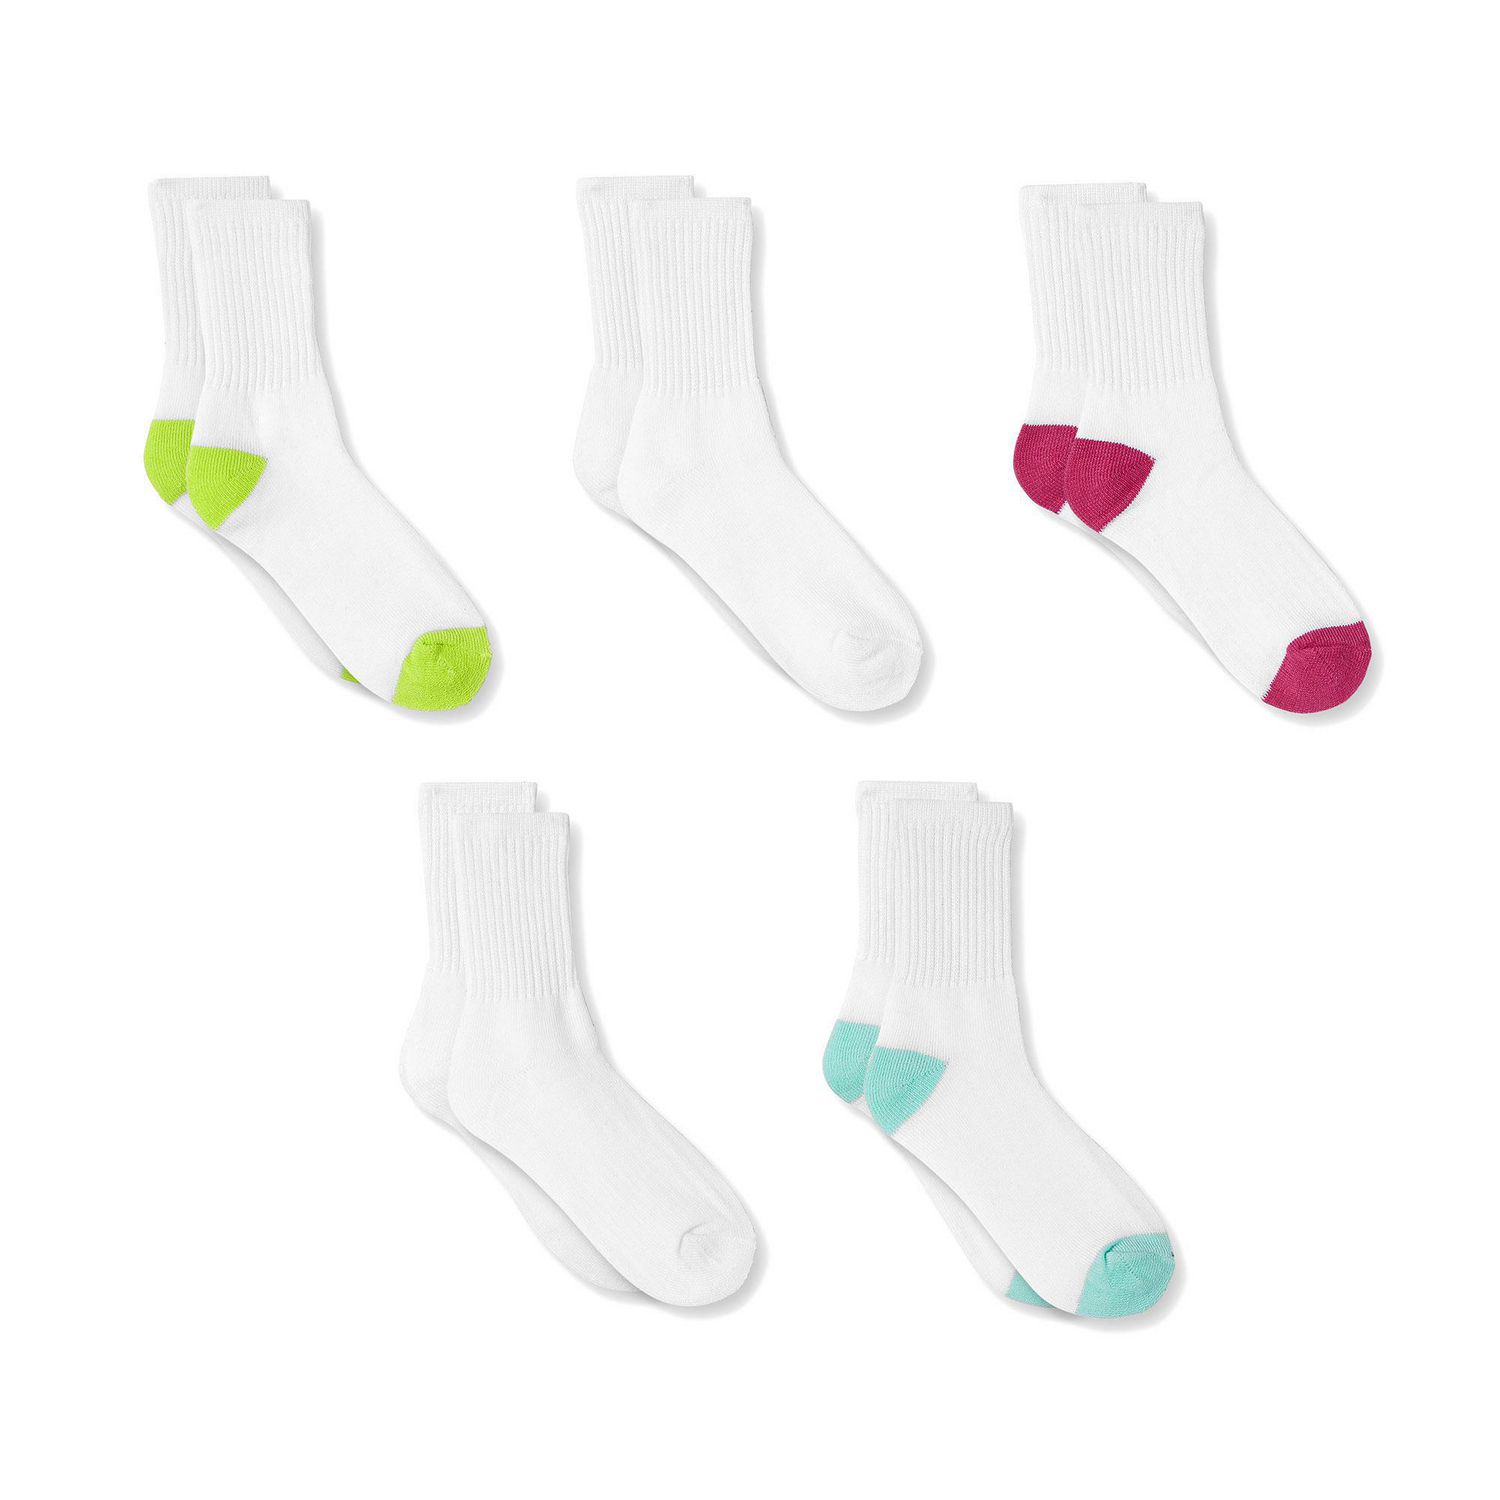 Athletic Works Girls Flat Knit Ankle Socks, 10-Pack, Sizes S (6-10.5) - L  (4-10)